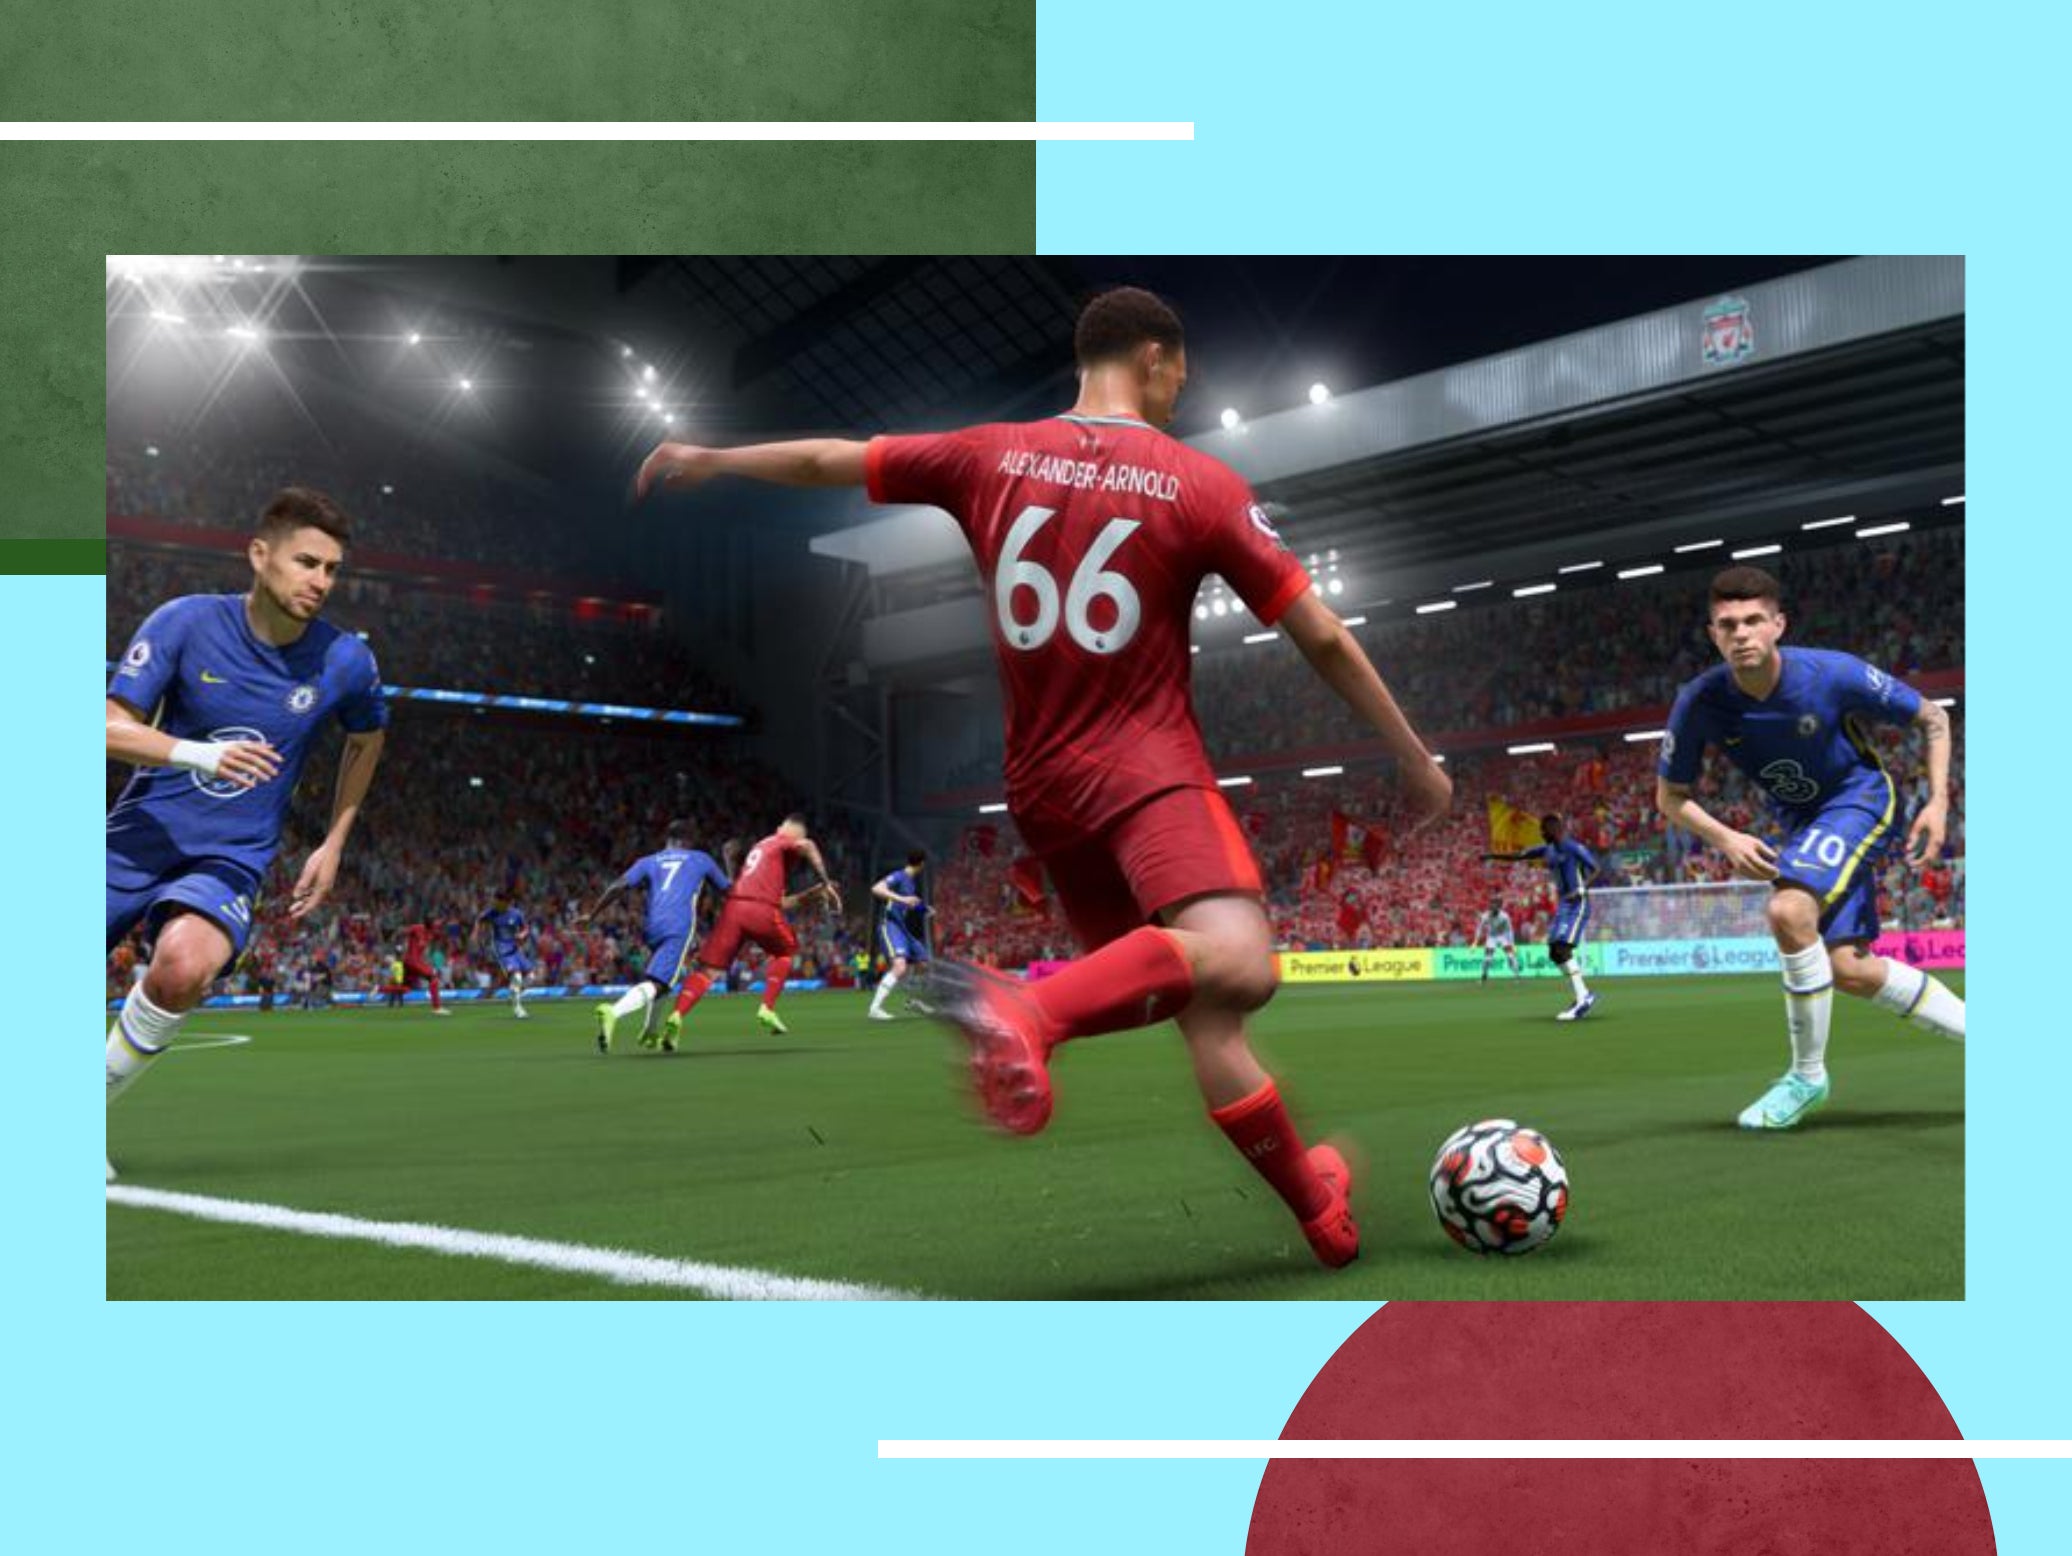 FIFA 23 officially released - lands on PC and console platforms